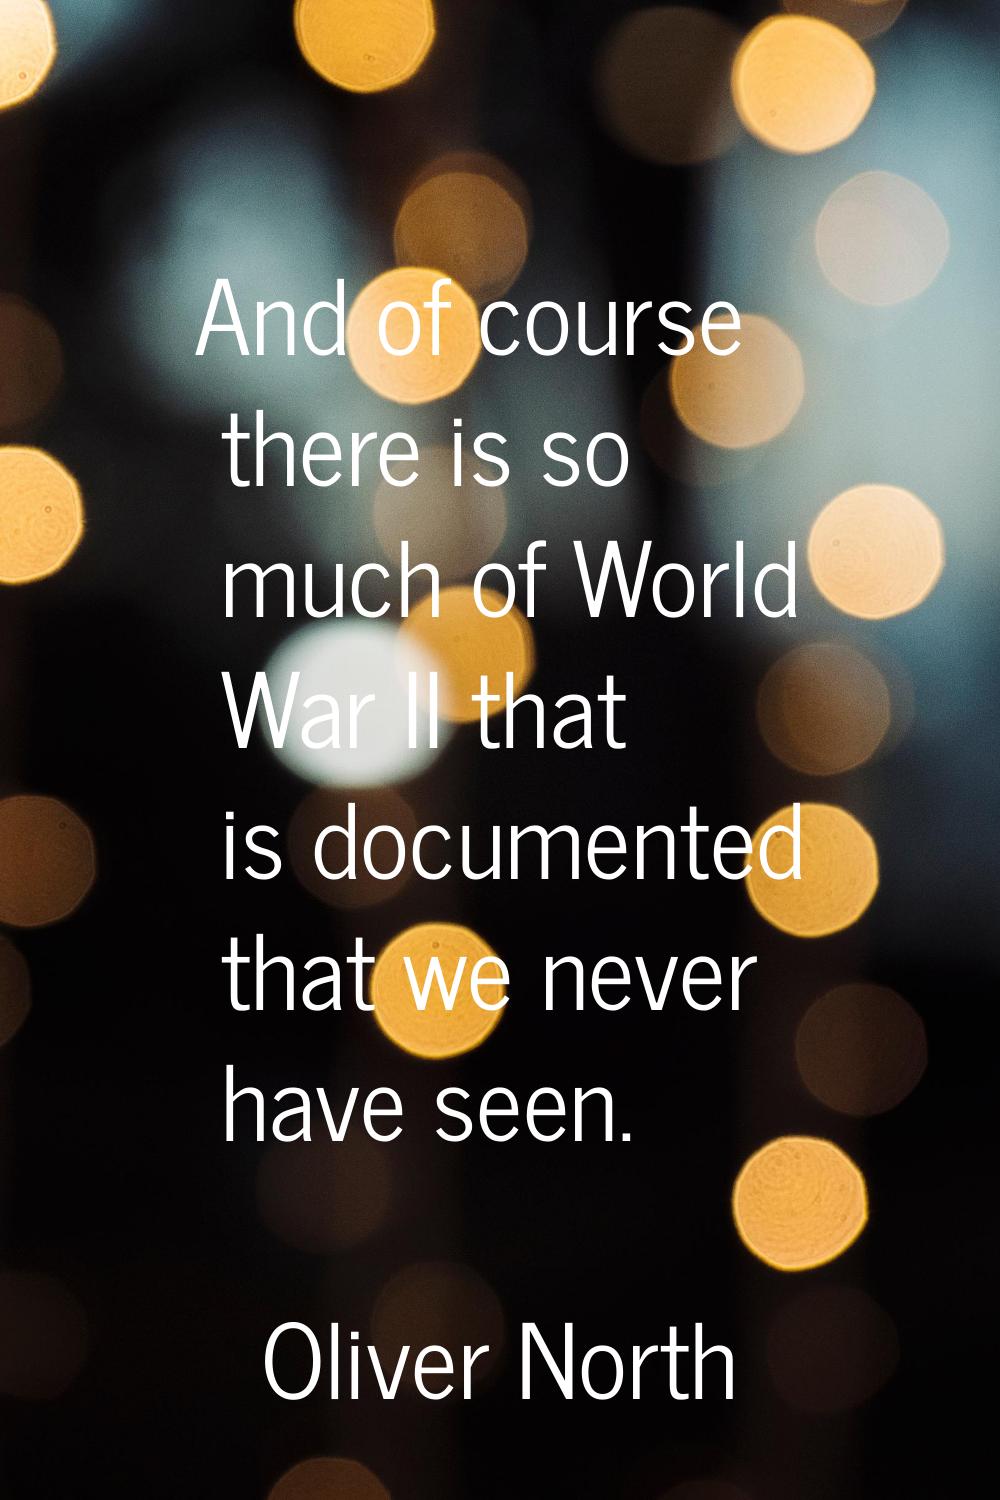 And of course there is so much of World War II that is documented that we never have seen.